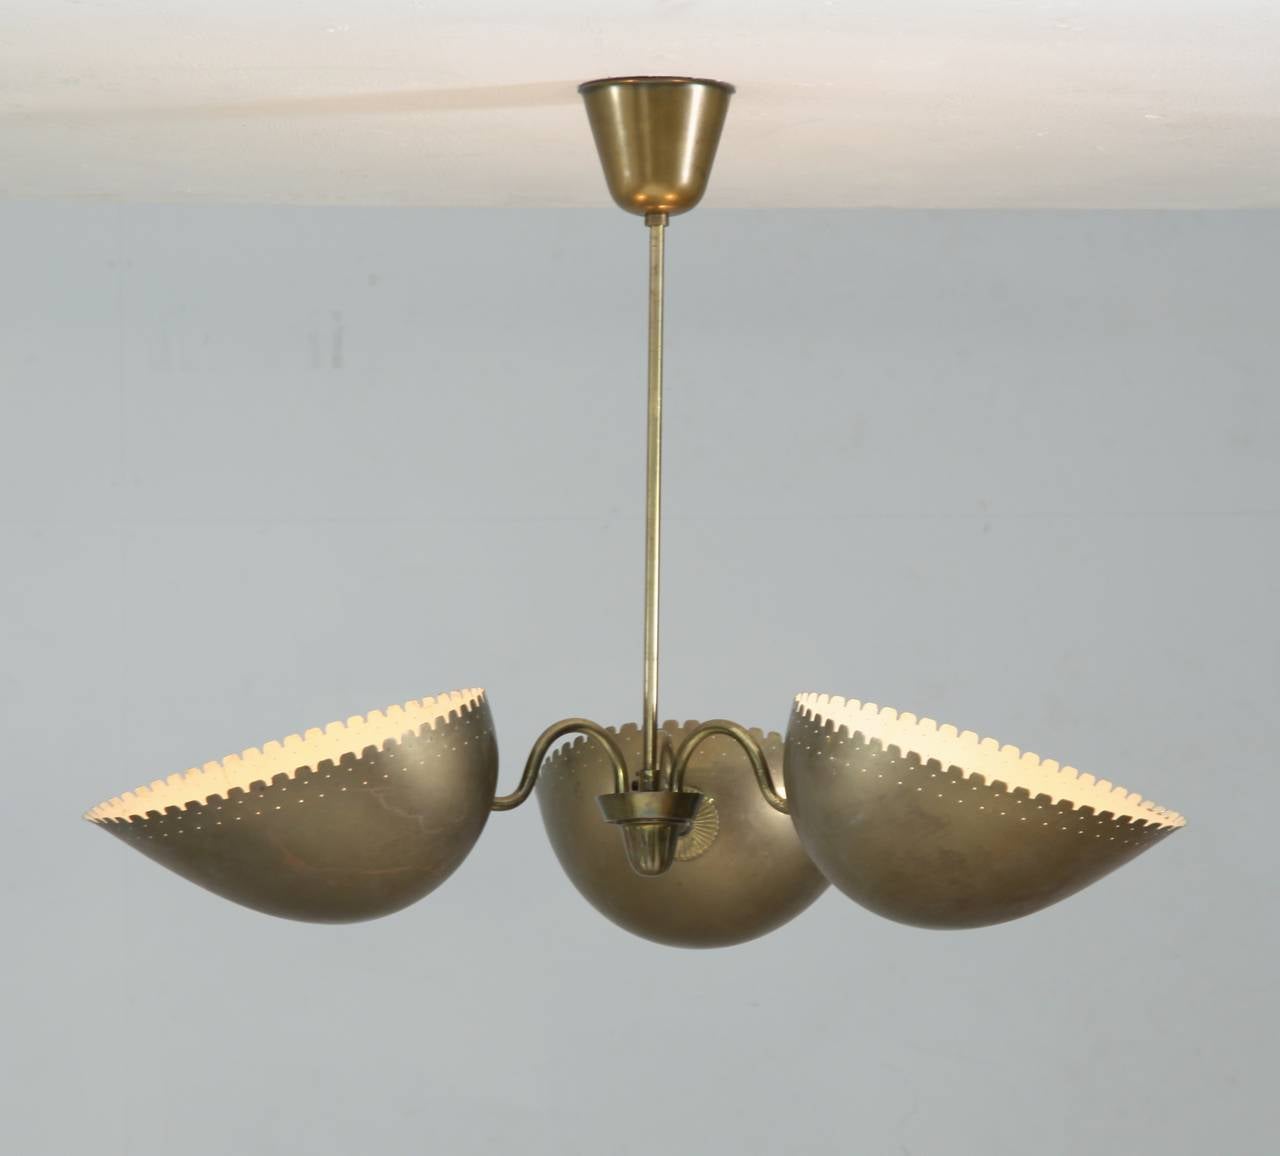 A brass pendant from Sweden, attributed to Bertil Brisborg for Bohlmarks. The lamp has, three shades with serrated and perforated edges, facing upwards.